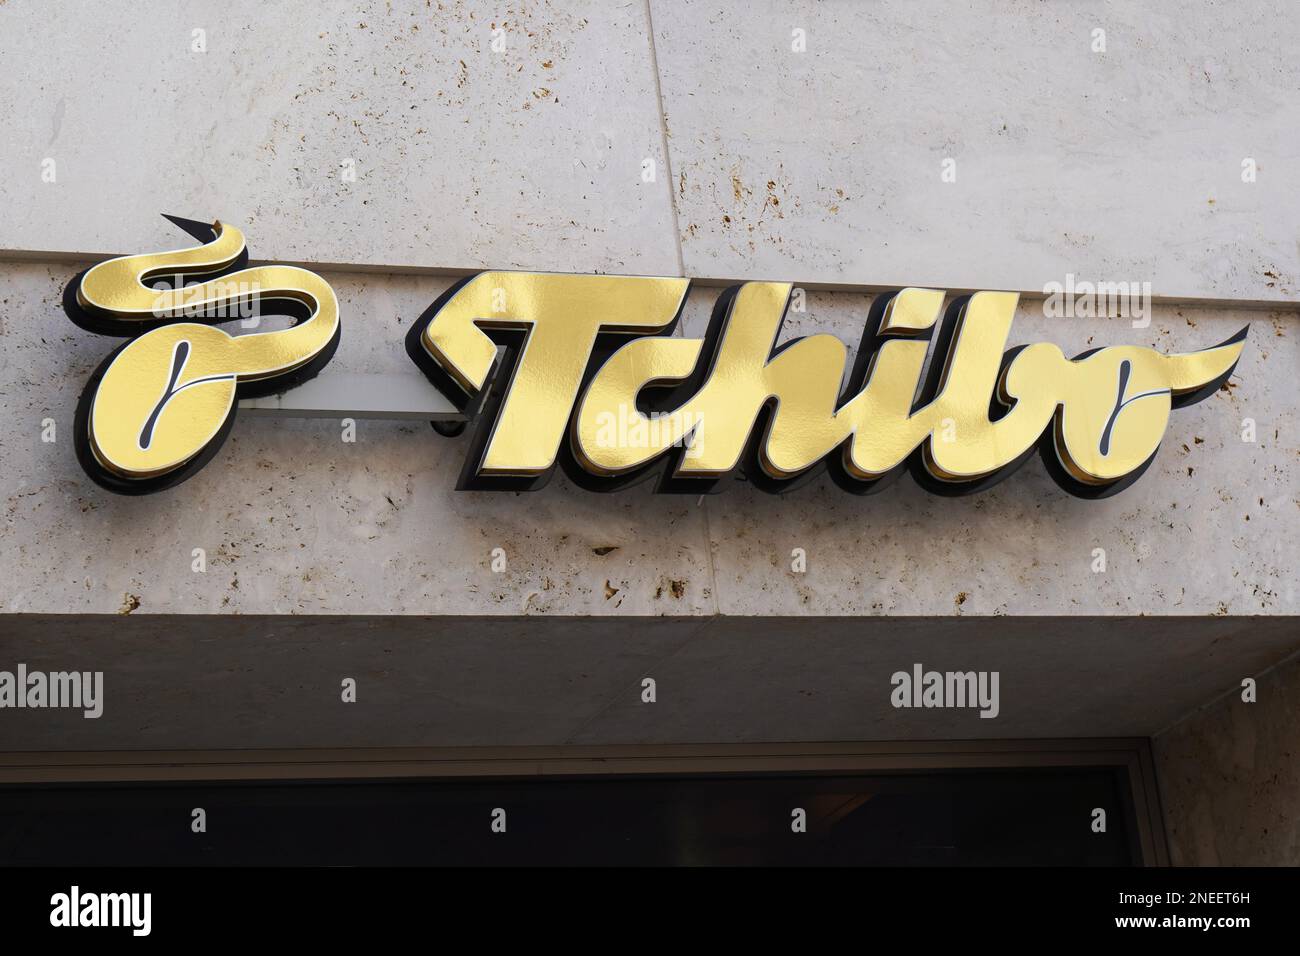 Hannover, Germany - March 02, 2020: Tchibo logo store sign at local branch of german coffee retail chain stores Stock Photo